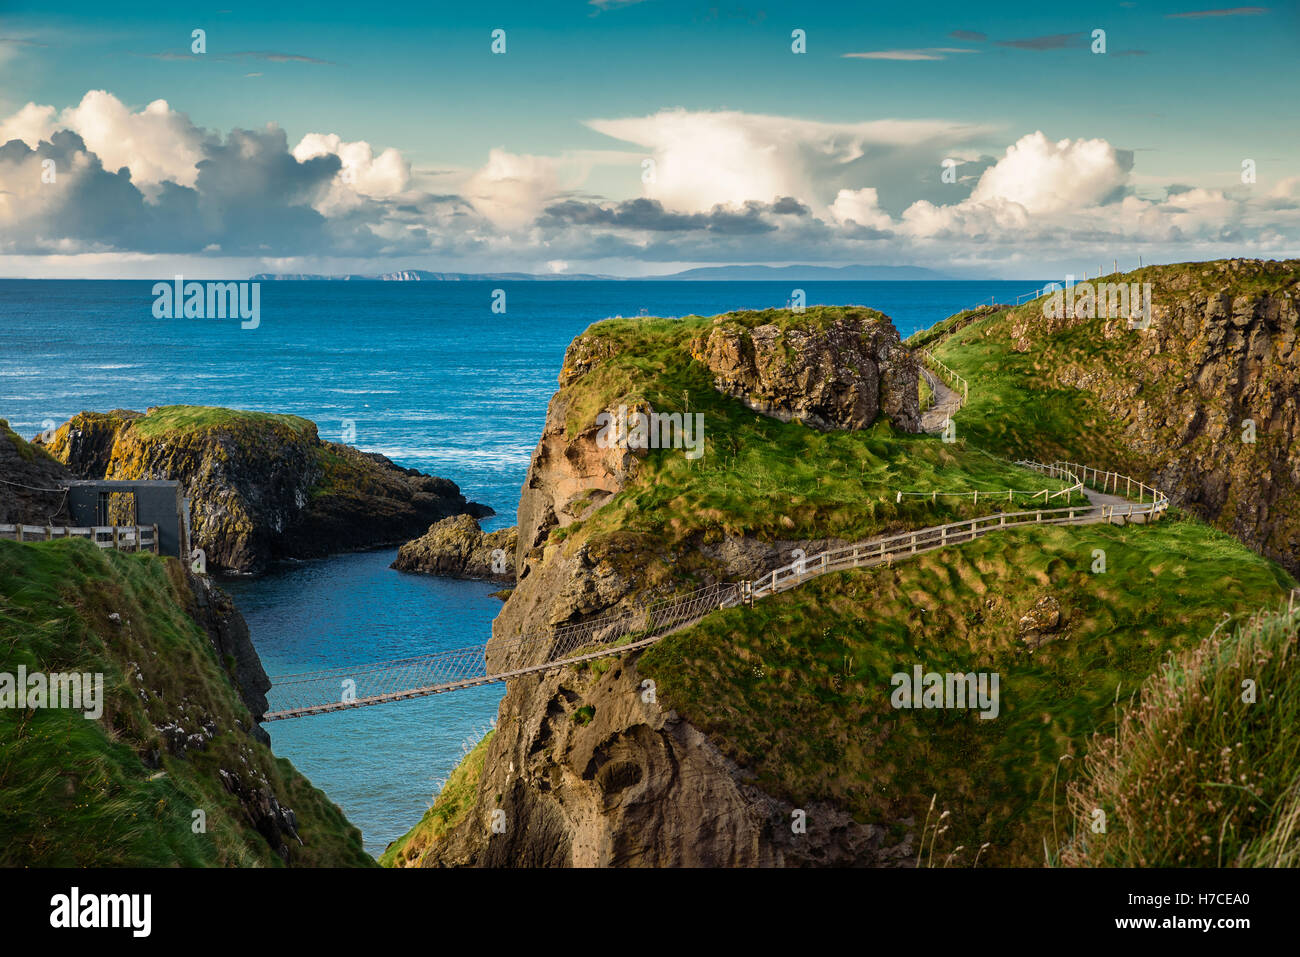 Carrick-a-rede rope bridge, Famous place in Northern Ireland Stock